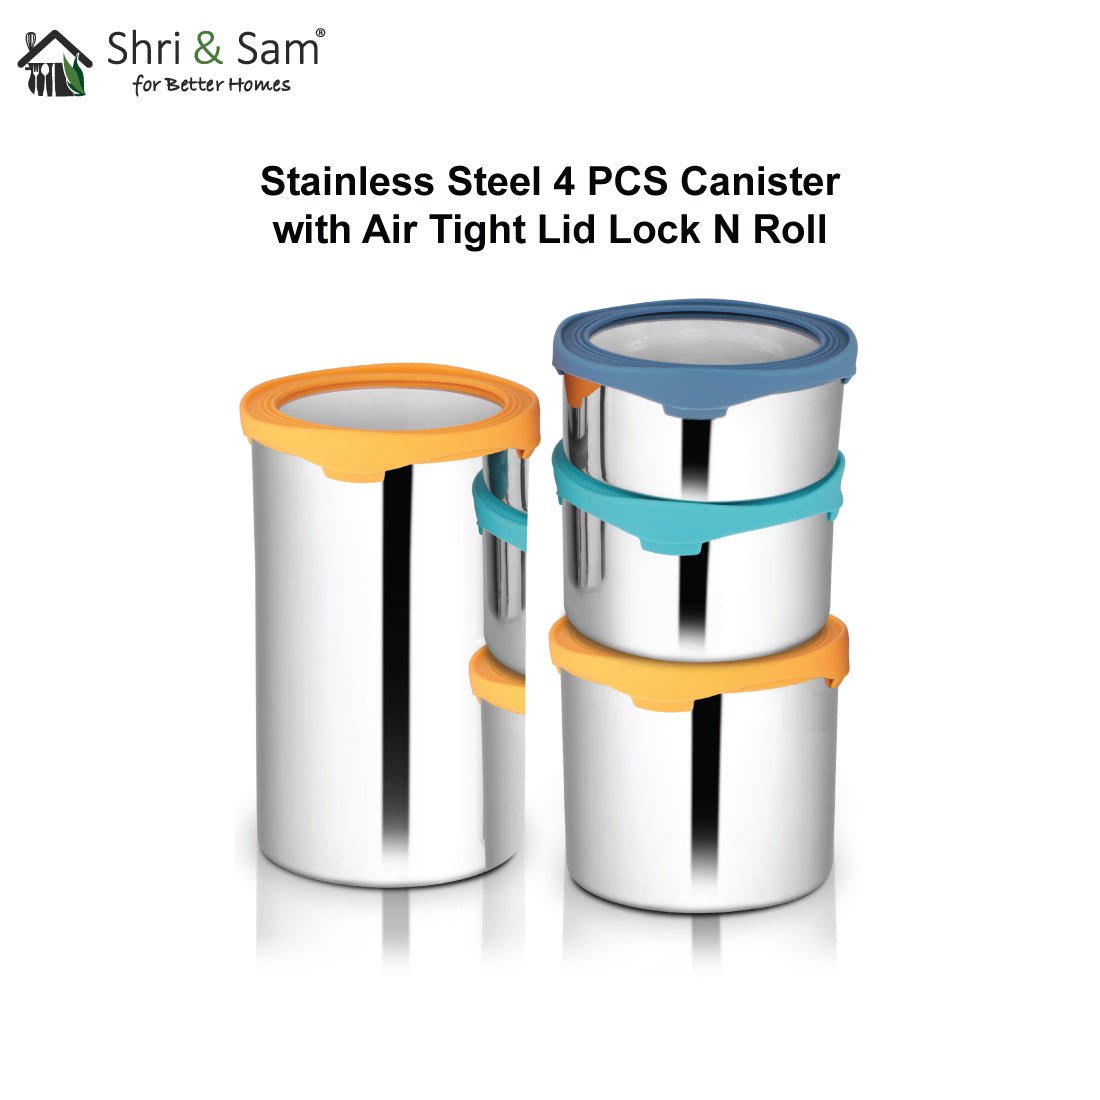 Stainless Steel 4 PCS Canister with Air Tight Lid Lock N Roll